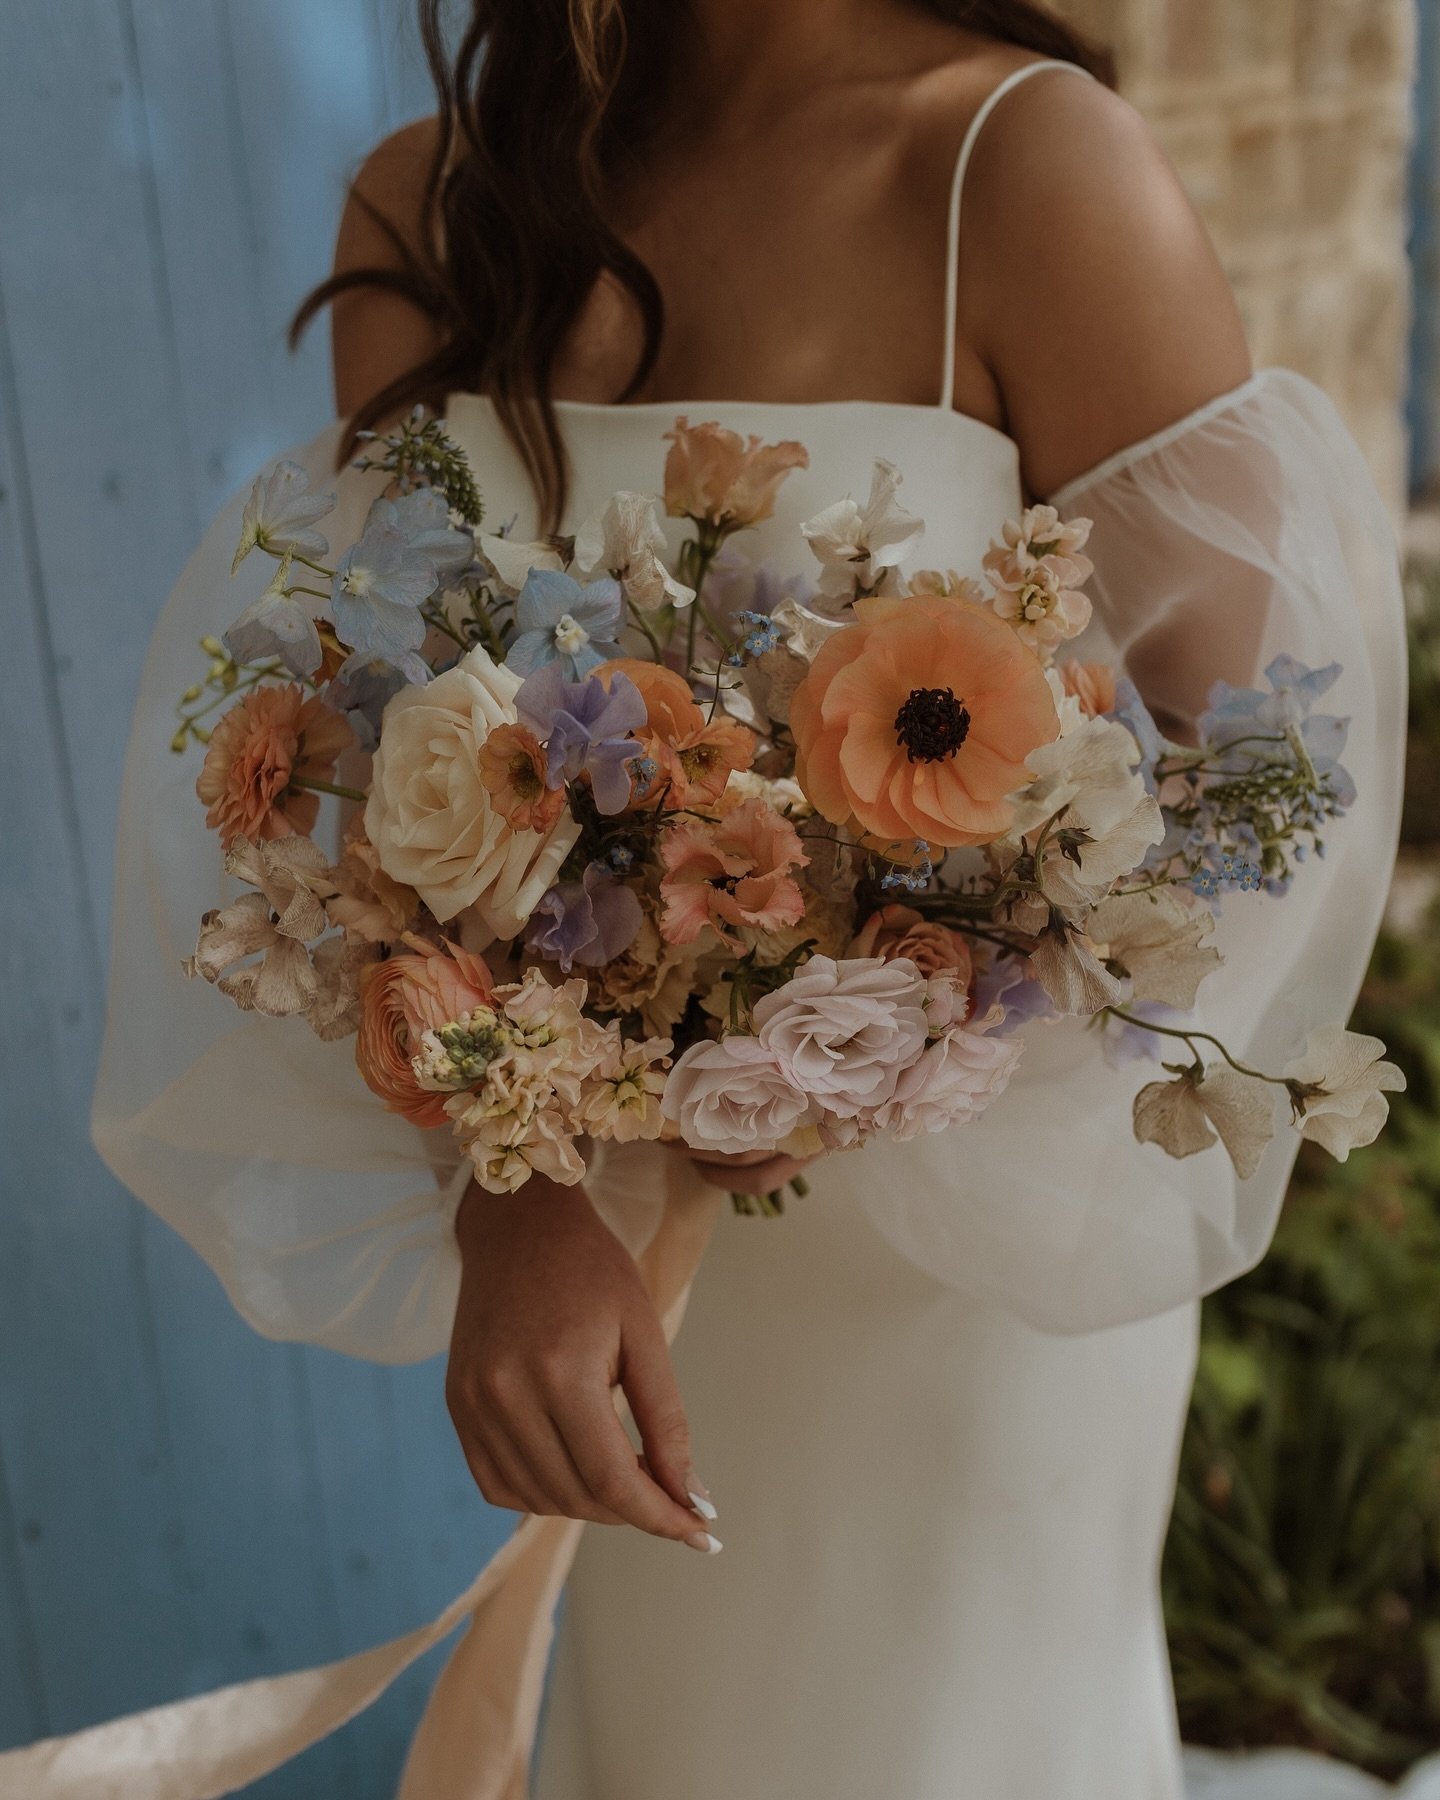 Forever in love with this bouquet. 

Concept, design + styling @thetrove_ 
Photography @jesslathanphotography
Floral design @blossomandash
Venue @woodhillhall
Stationery + signage @abbiewortondesign
Hire decor @thetrove_
Table linen @88eventscompany
